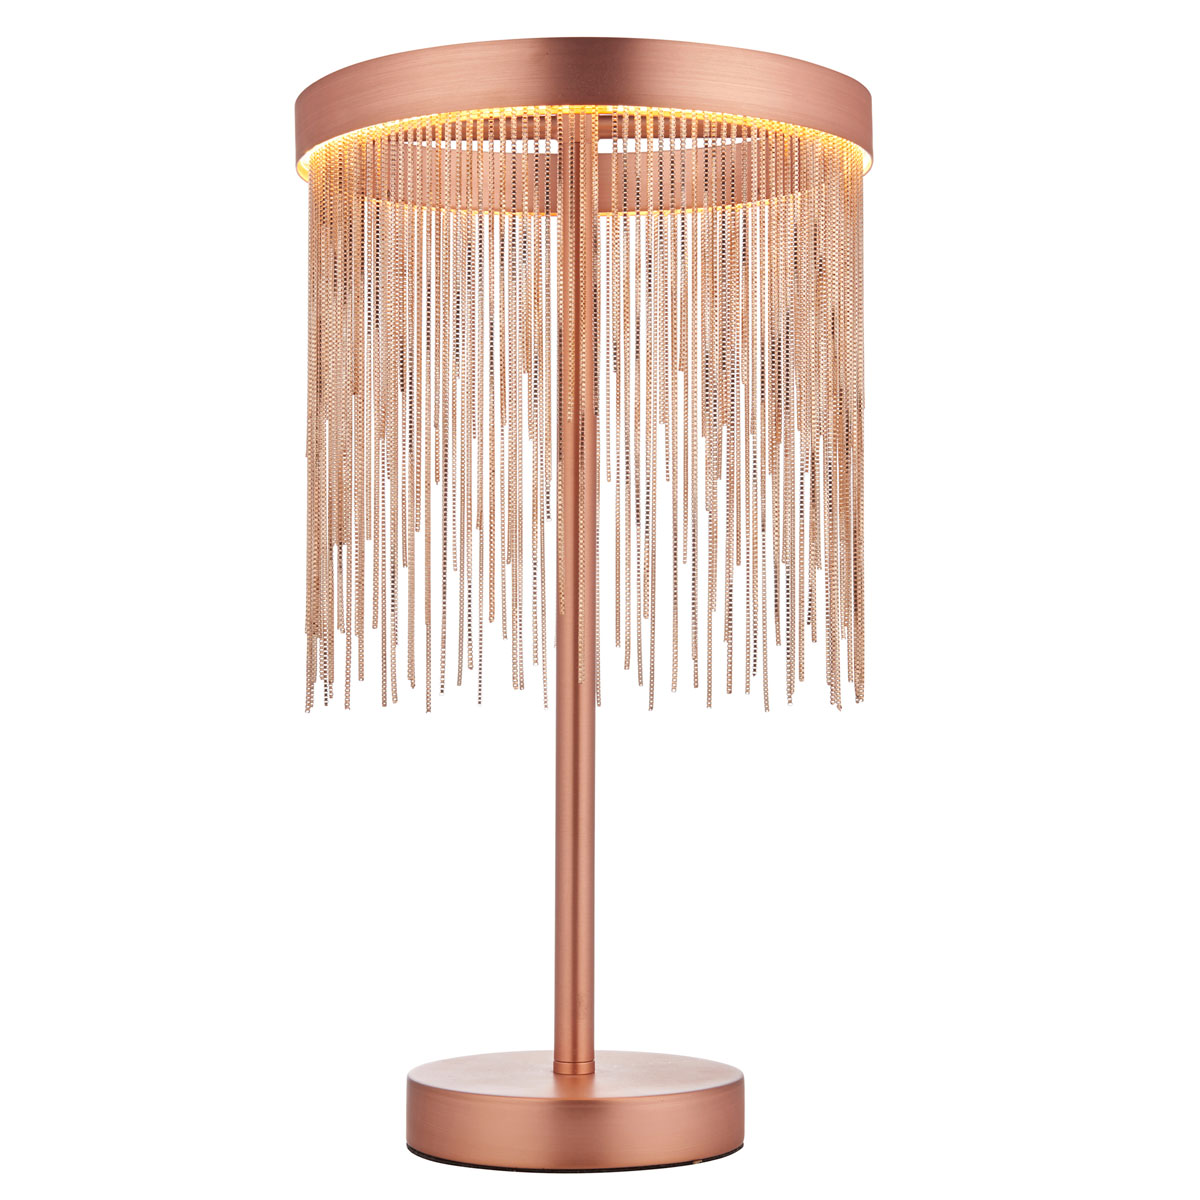 Zelma 1 Table Lamp Brushed Copper